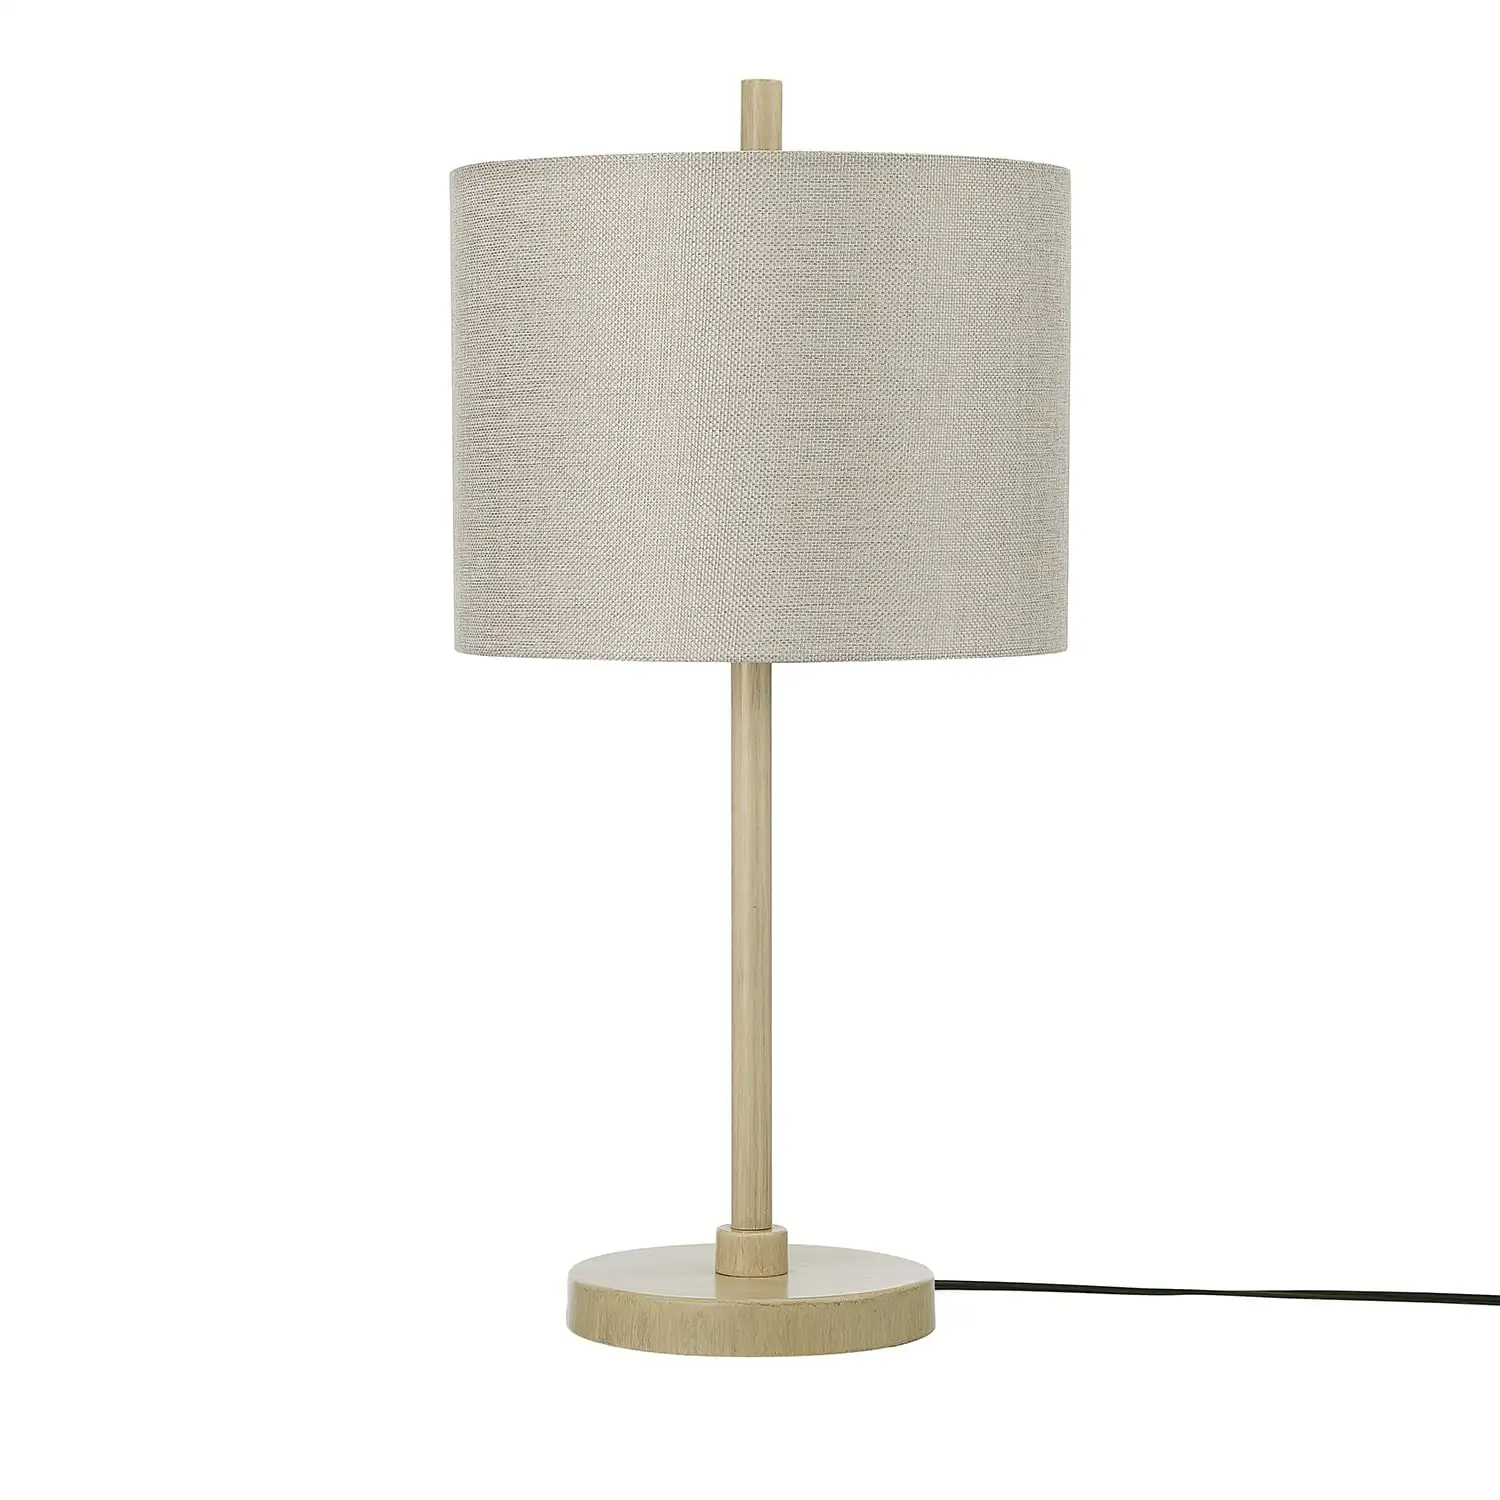 

Globe Electric Cove 22" Light Faux Wood Table Lamp with Jute Shade, 91004437